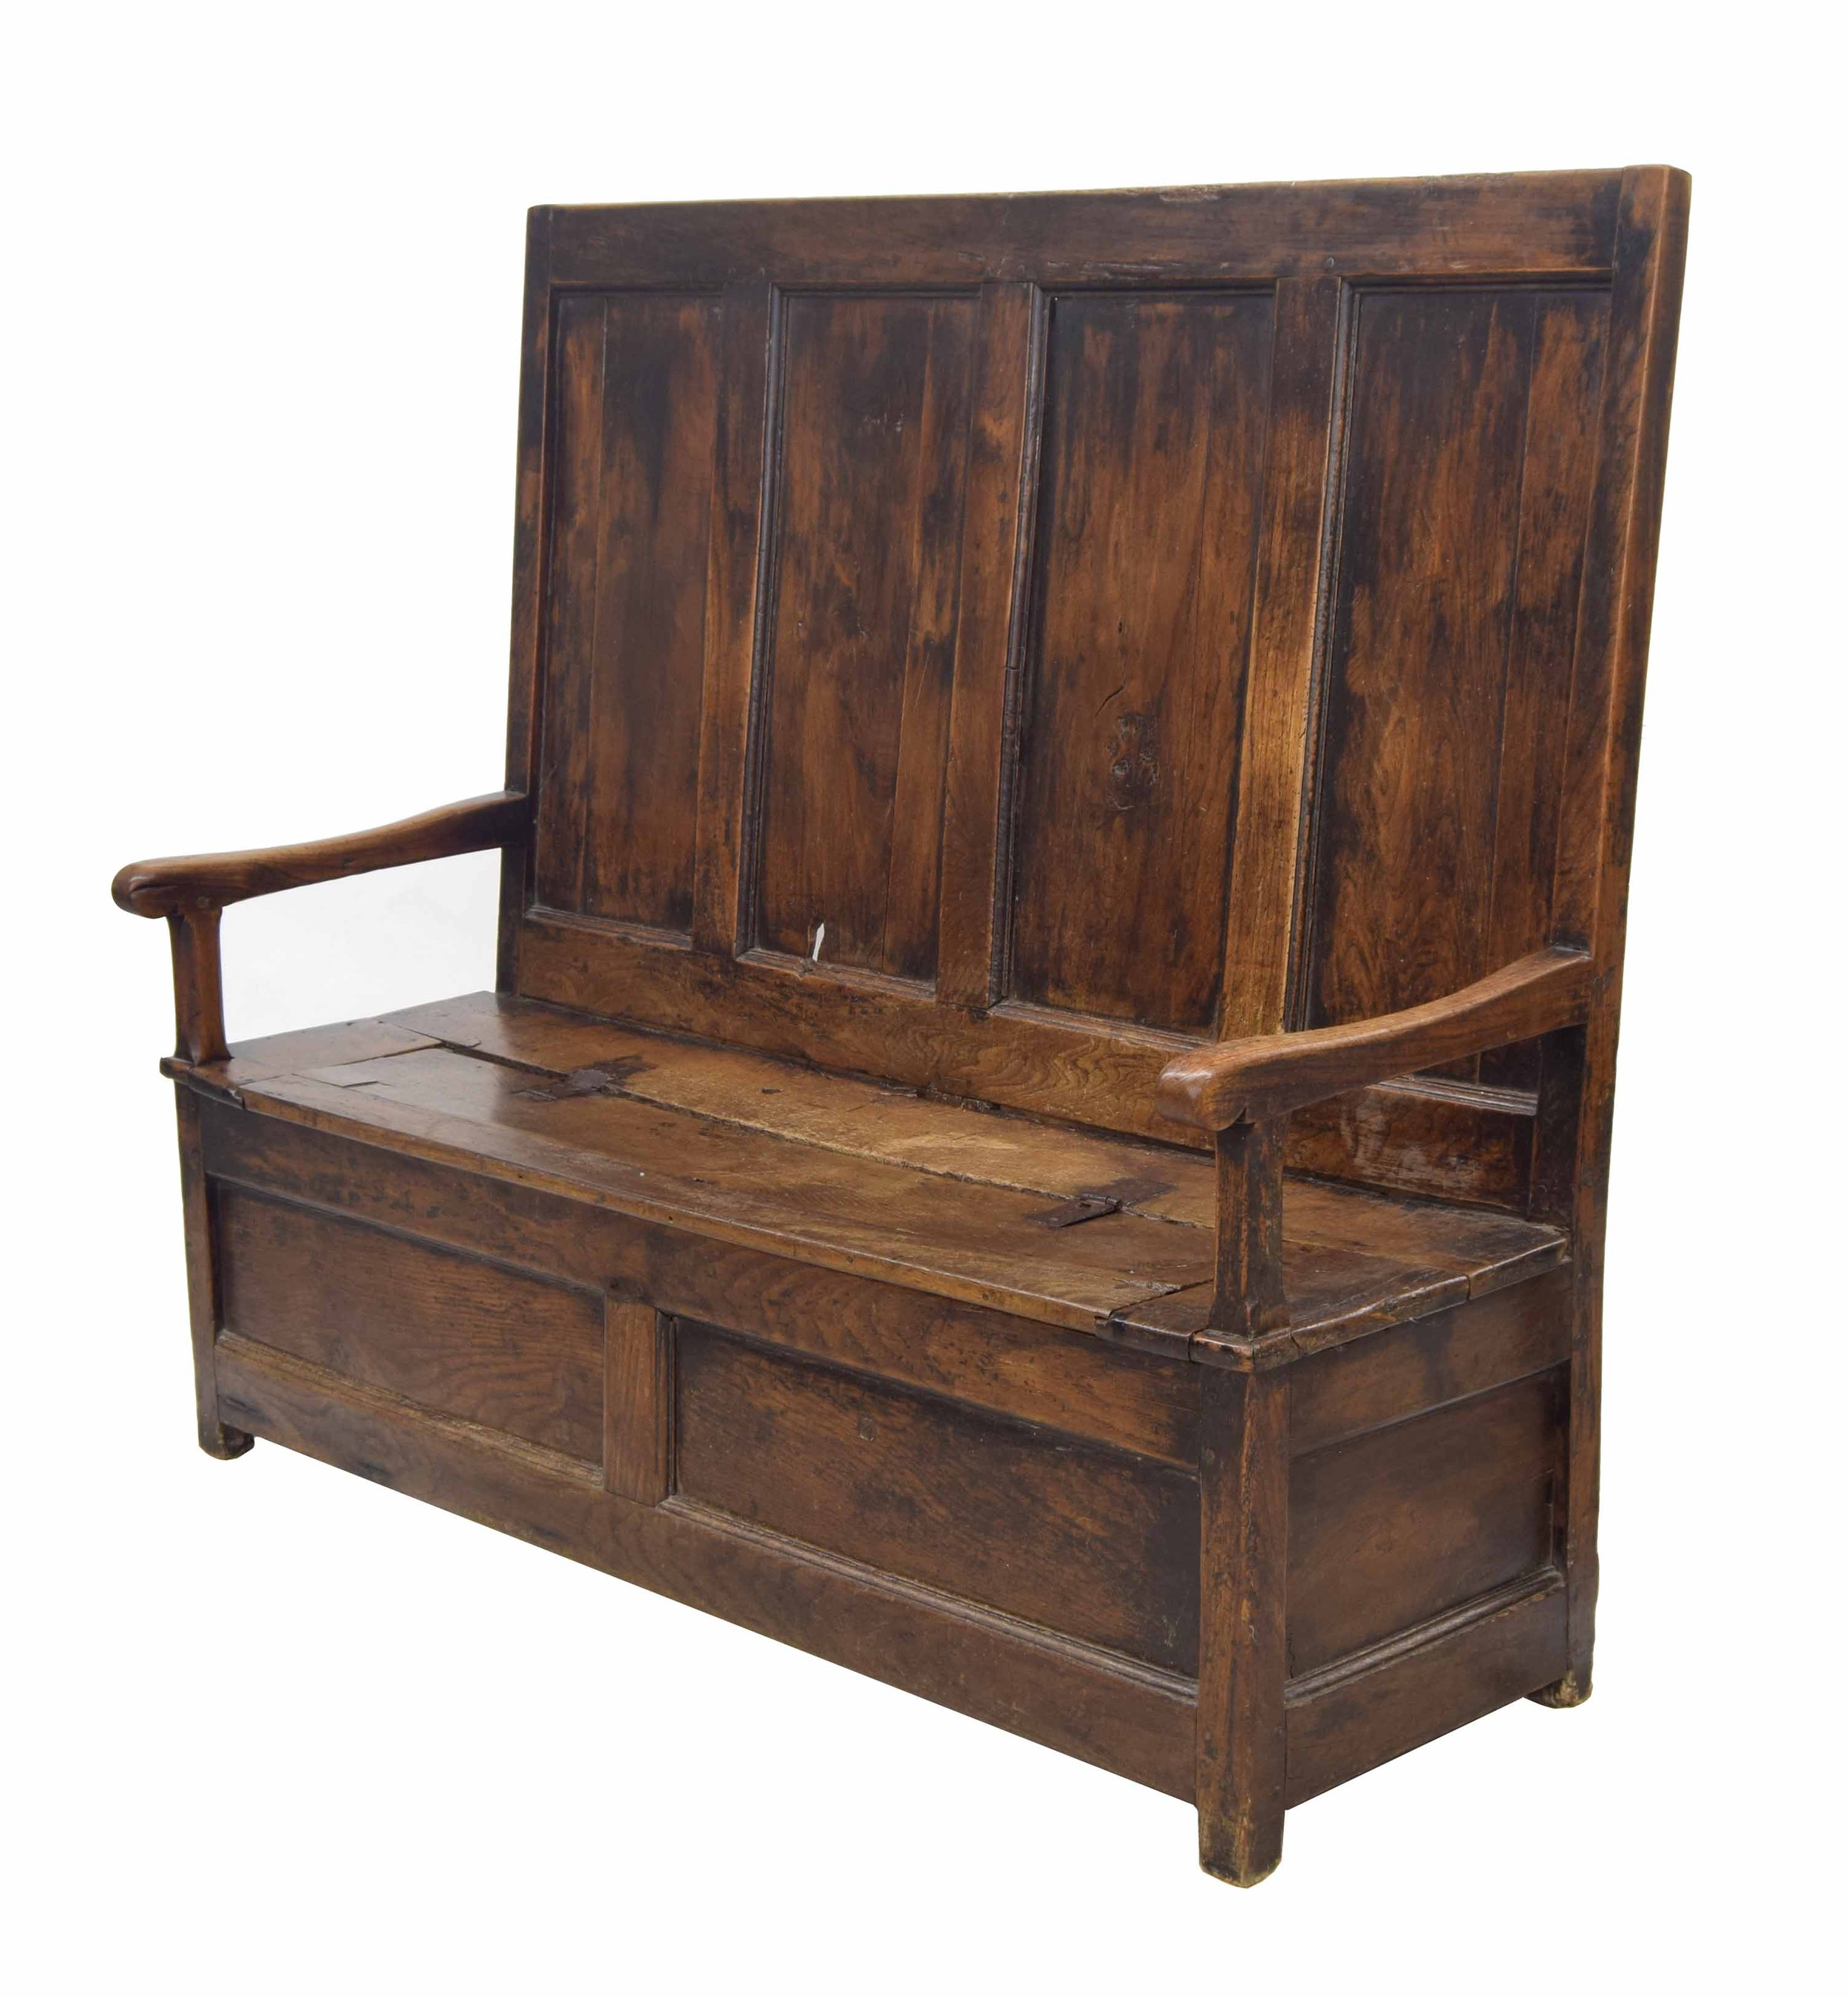 Georgian oak and elm box settle, the four panel back over a hinged seat enclosing an open box - Image 2 of 3